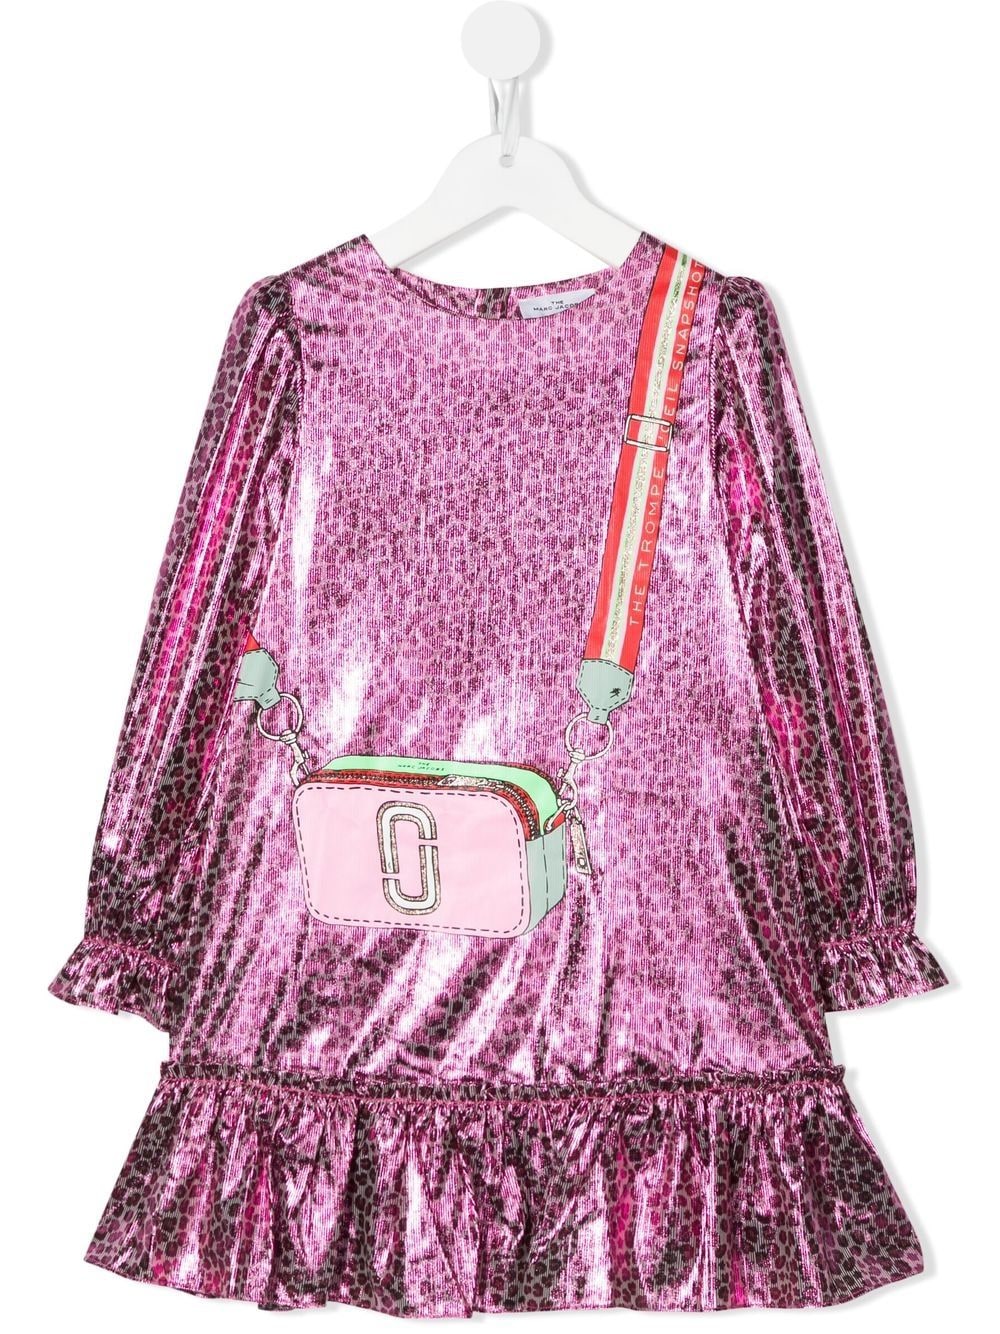 ＜Farfetch＞ Marc Jacobs Kids プリント ワンピース - ピンク